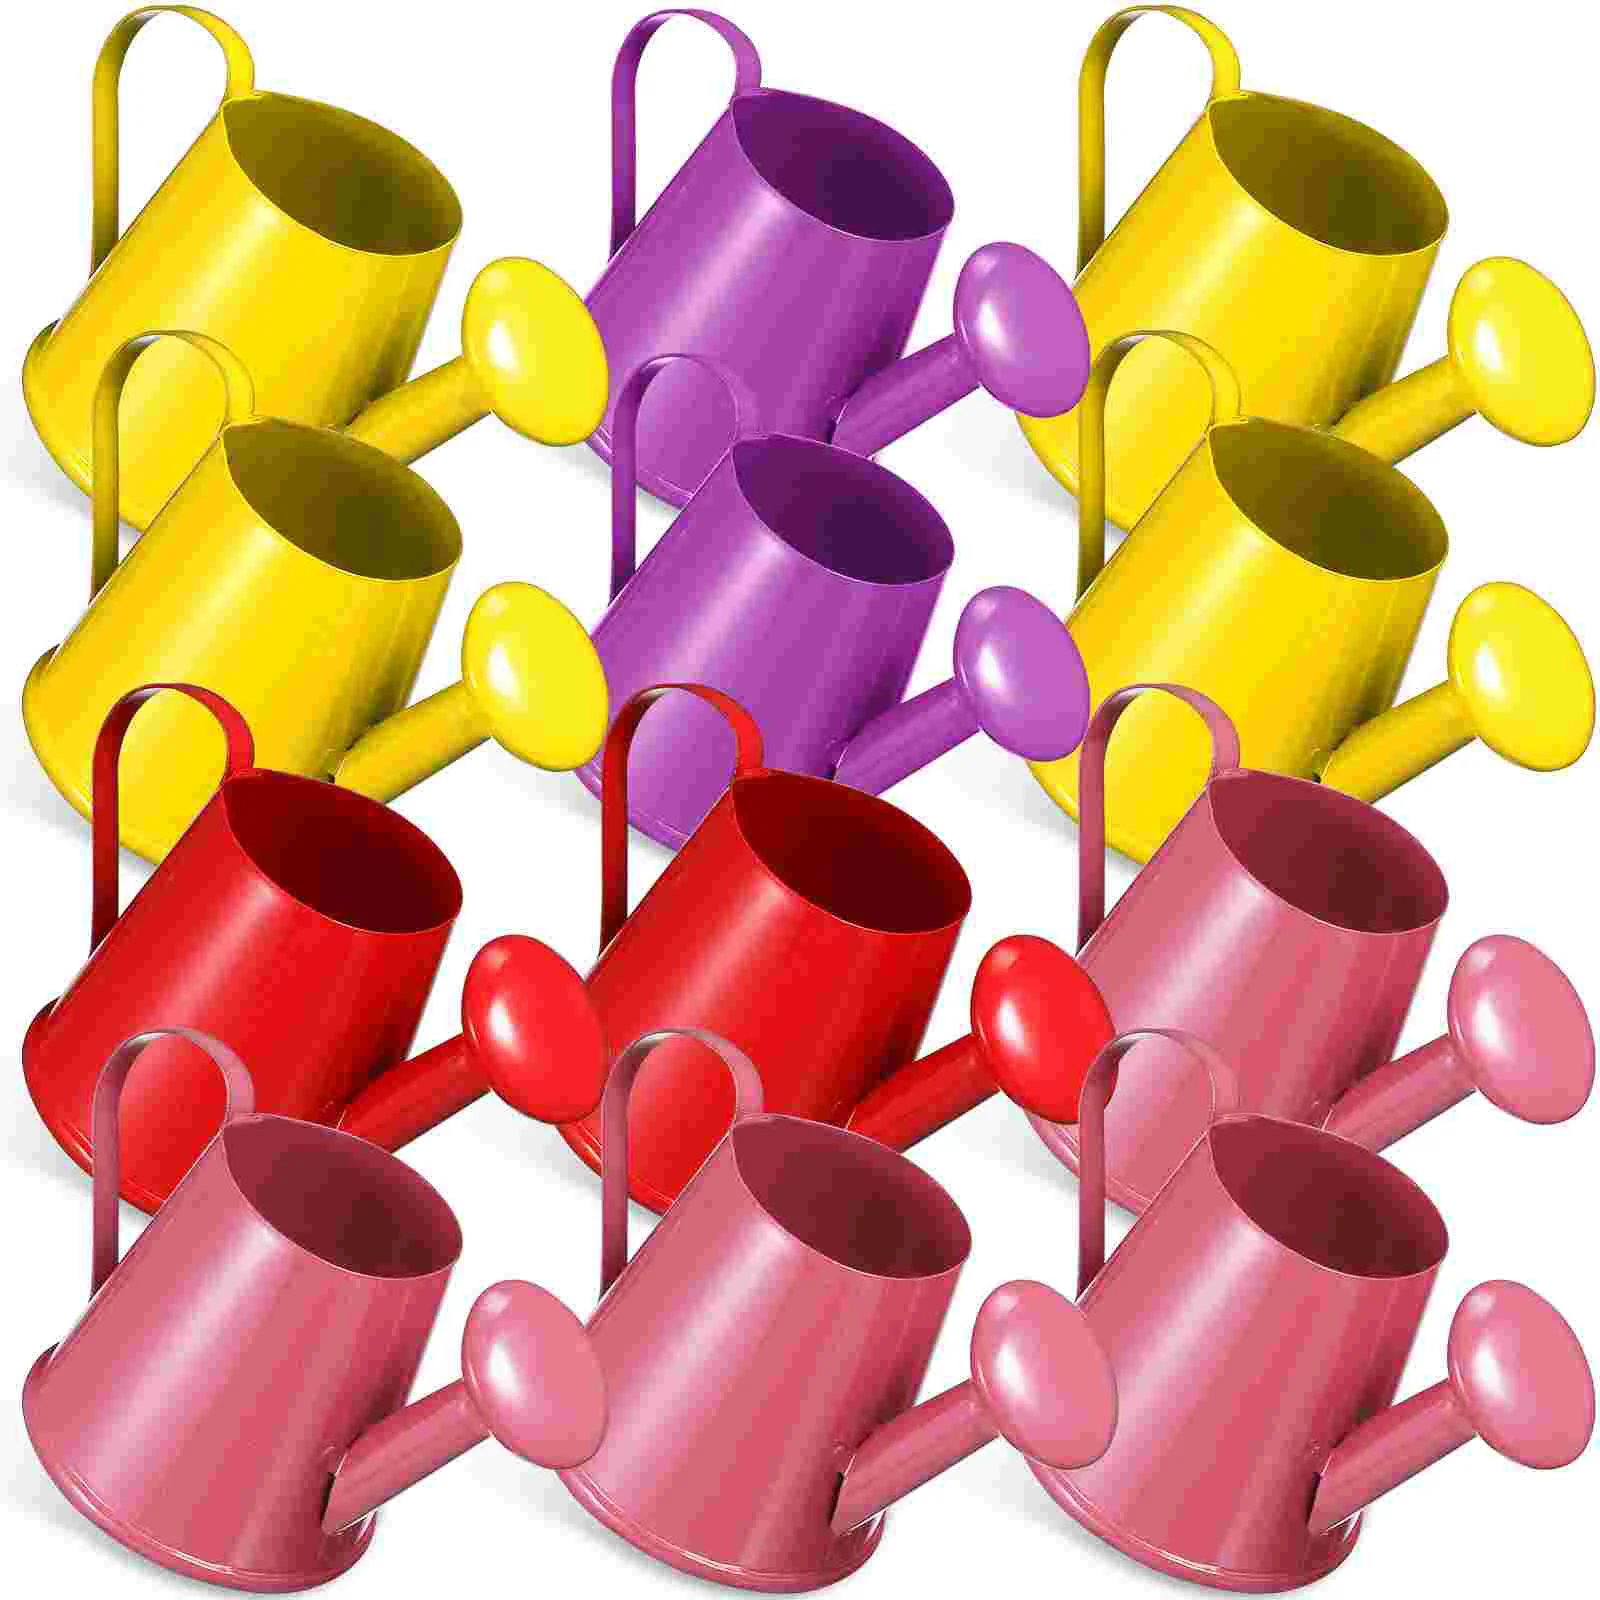 

12 Pcs Mini Super Small Pouring Vase Watering Kettles Outdoor Can Metal Iron Cans Toy Child